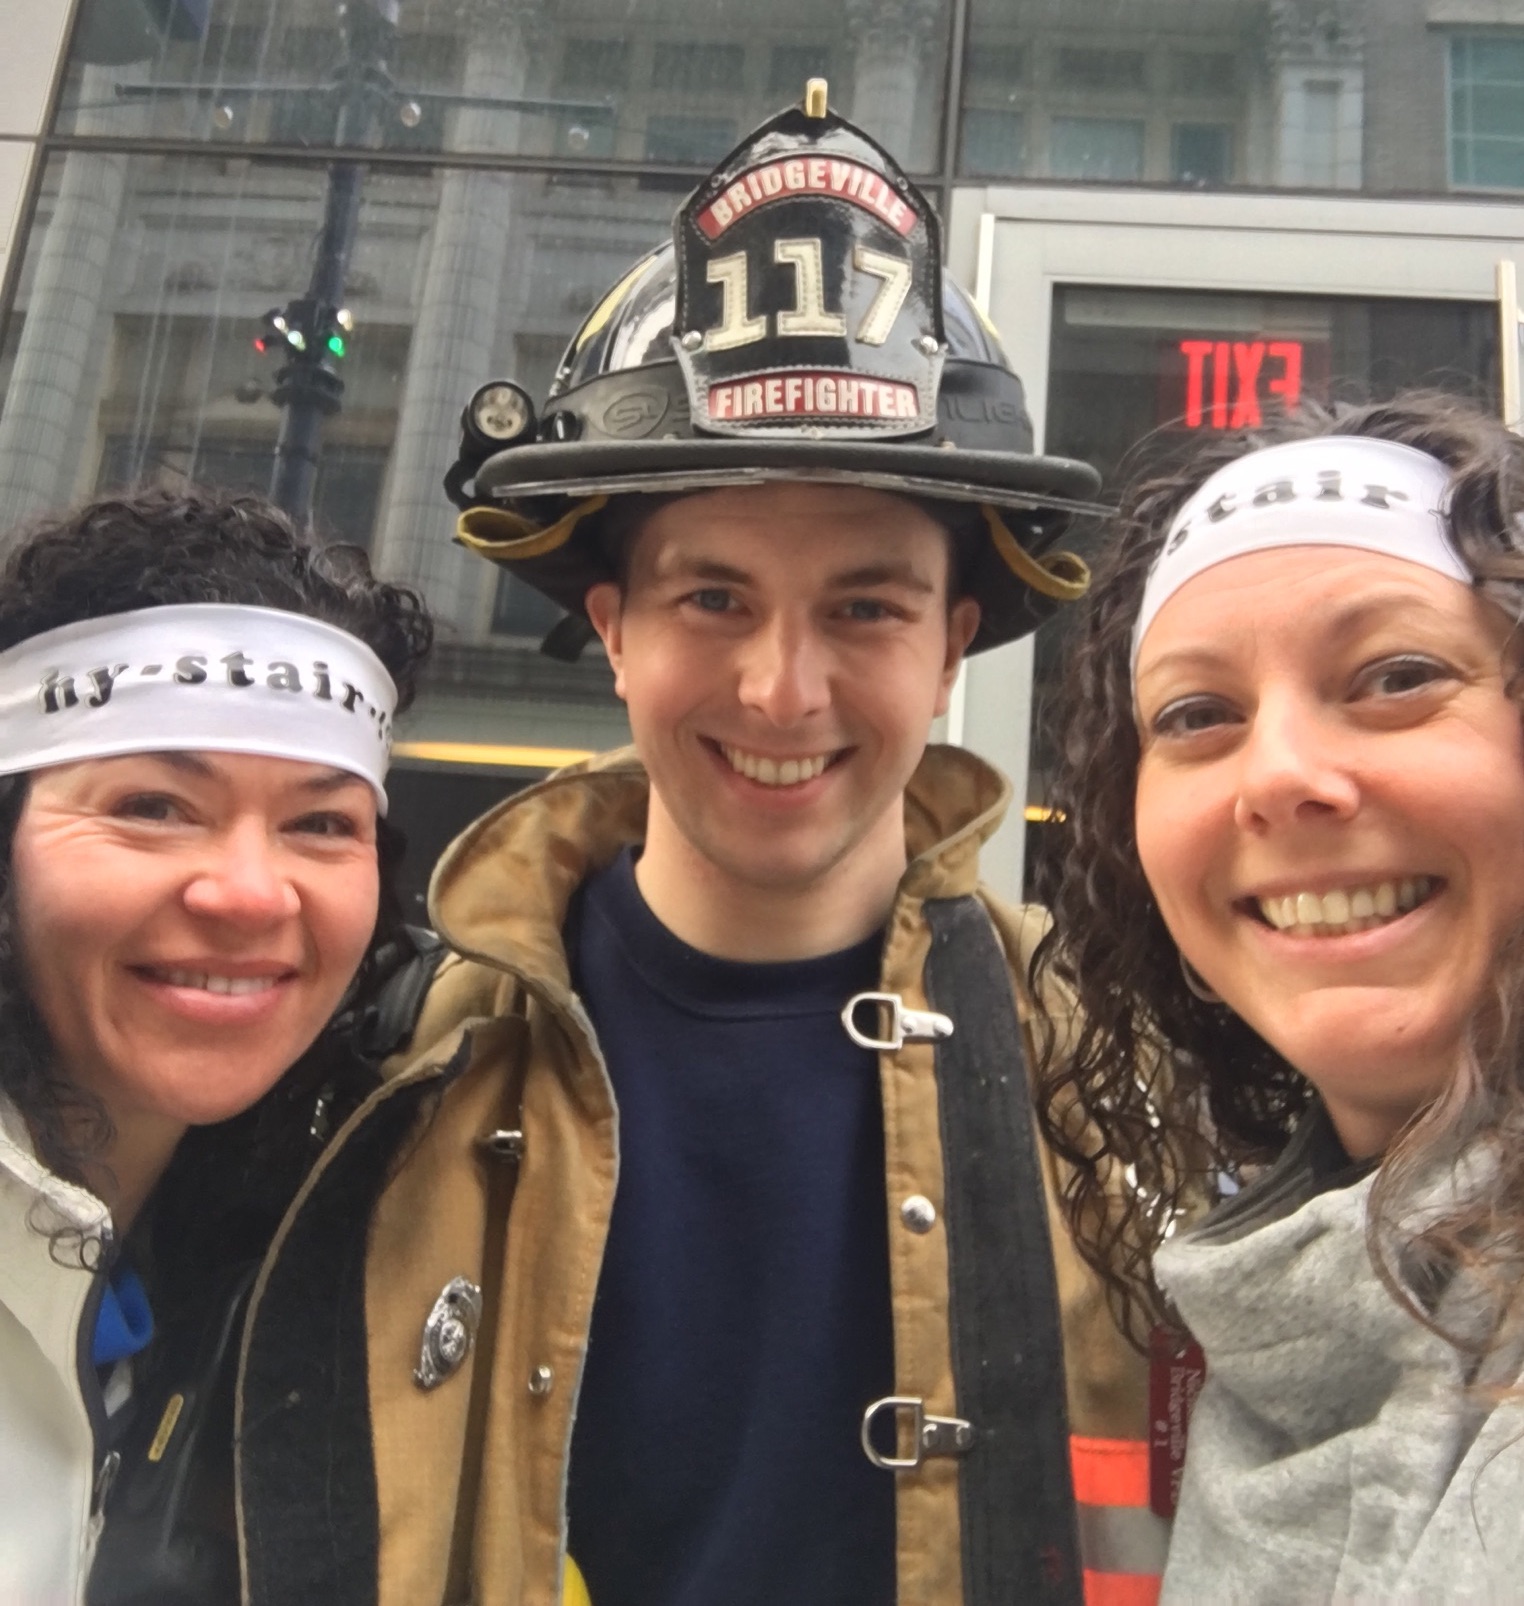 Smorey Giger Law fundraises for American Lung Association – Fight for Air Climb – team “Hy-Stair-ical”